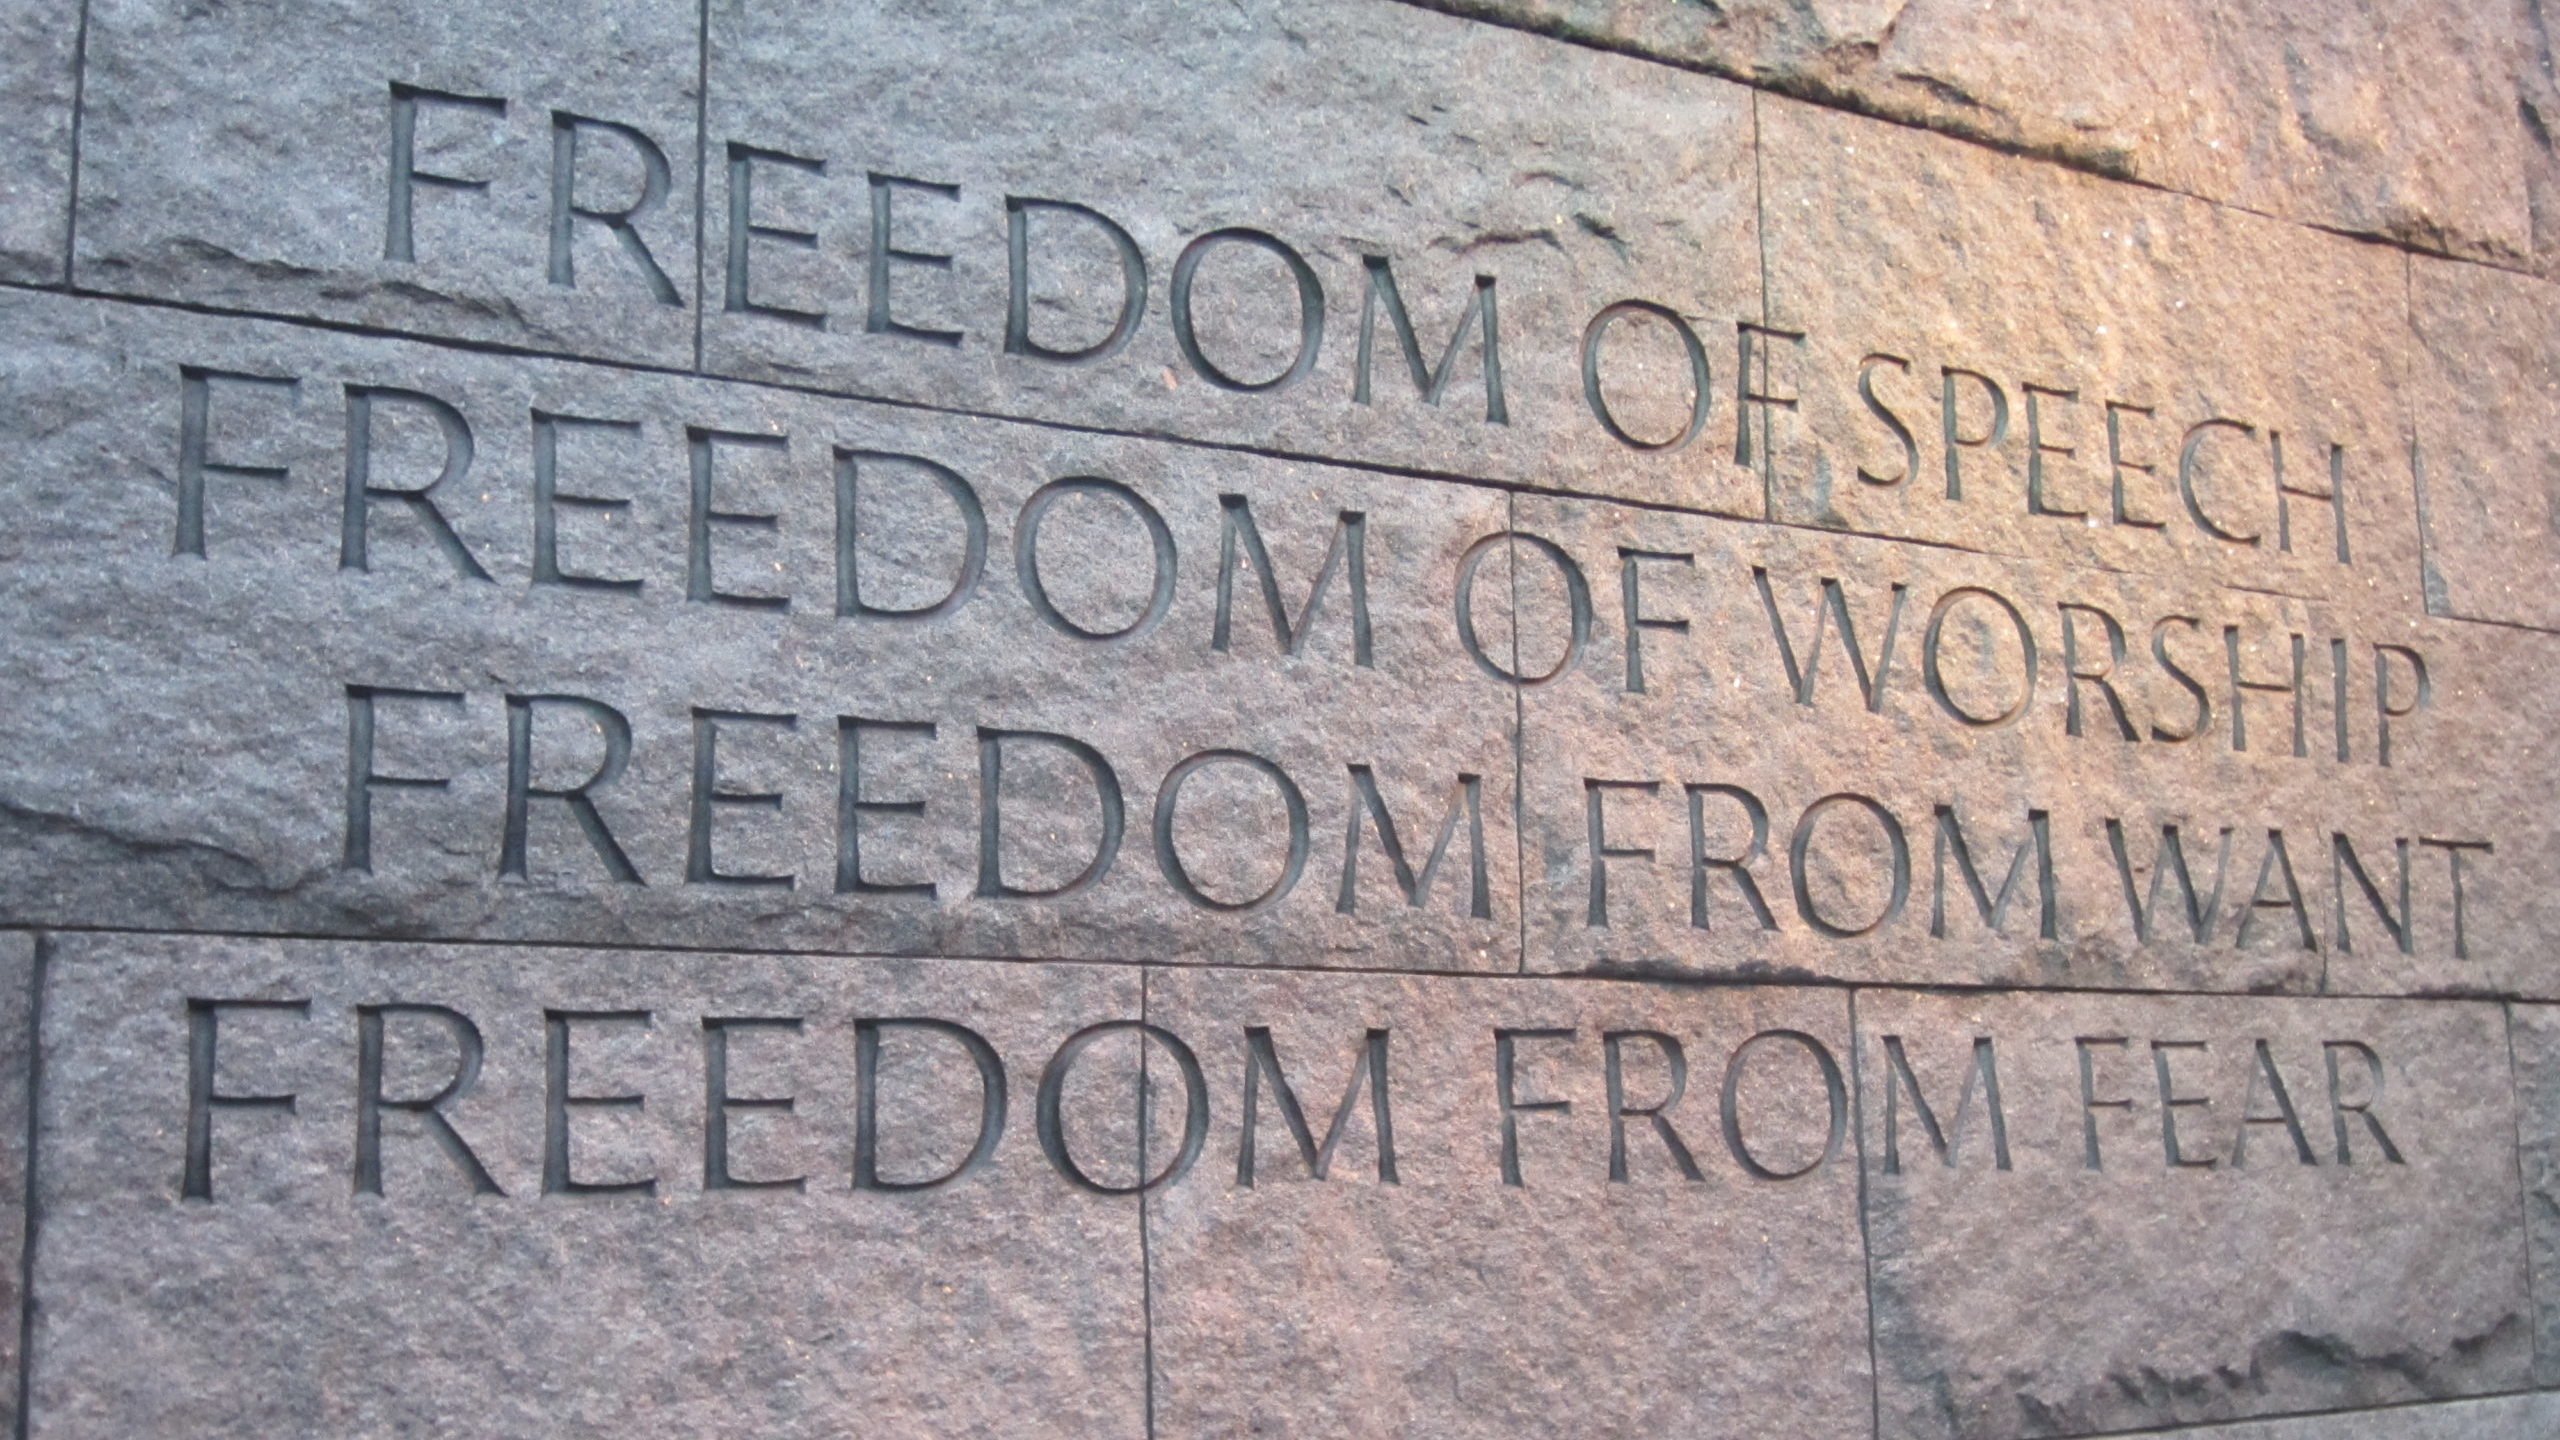 what was the purpose of the four freedoms speech